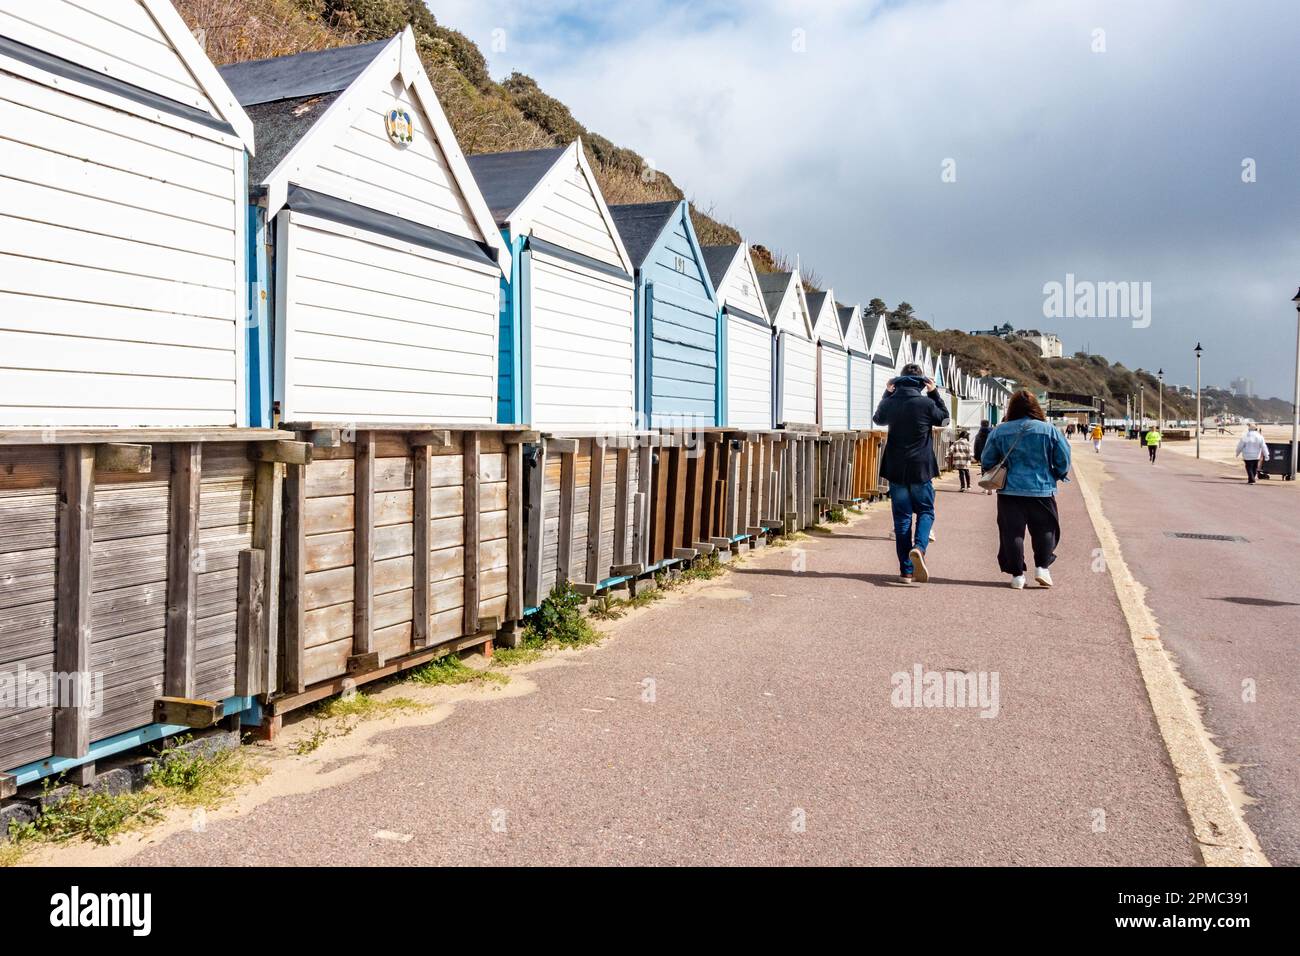 People walk along a path in front of beach huts on Bournemouth Beach in Dorset, UK under a stormy, grey sky Stock Photo